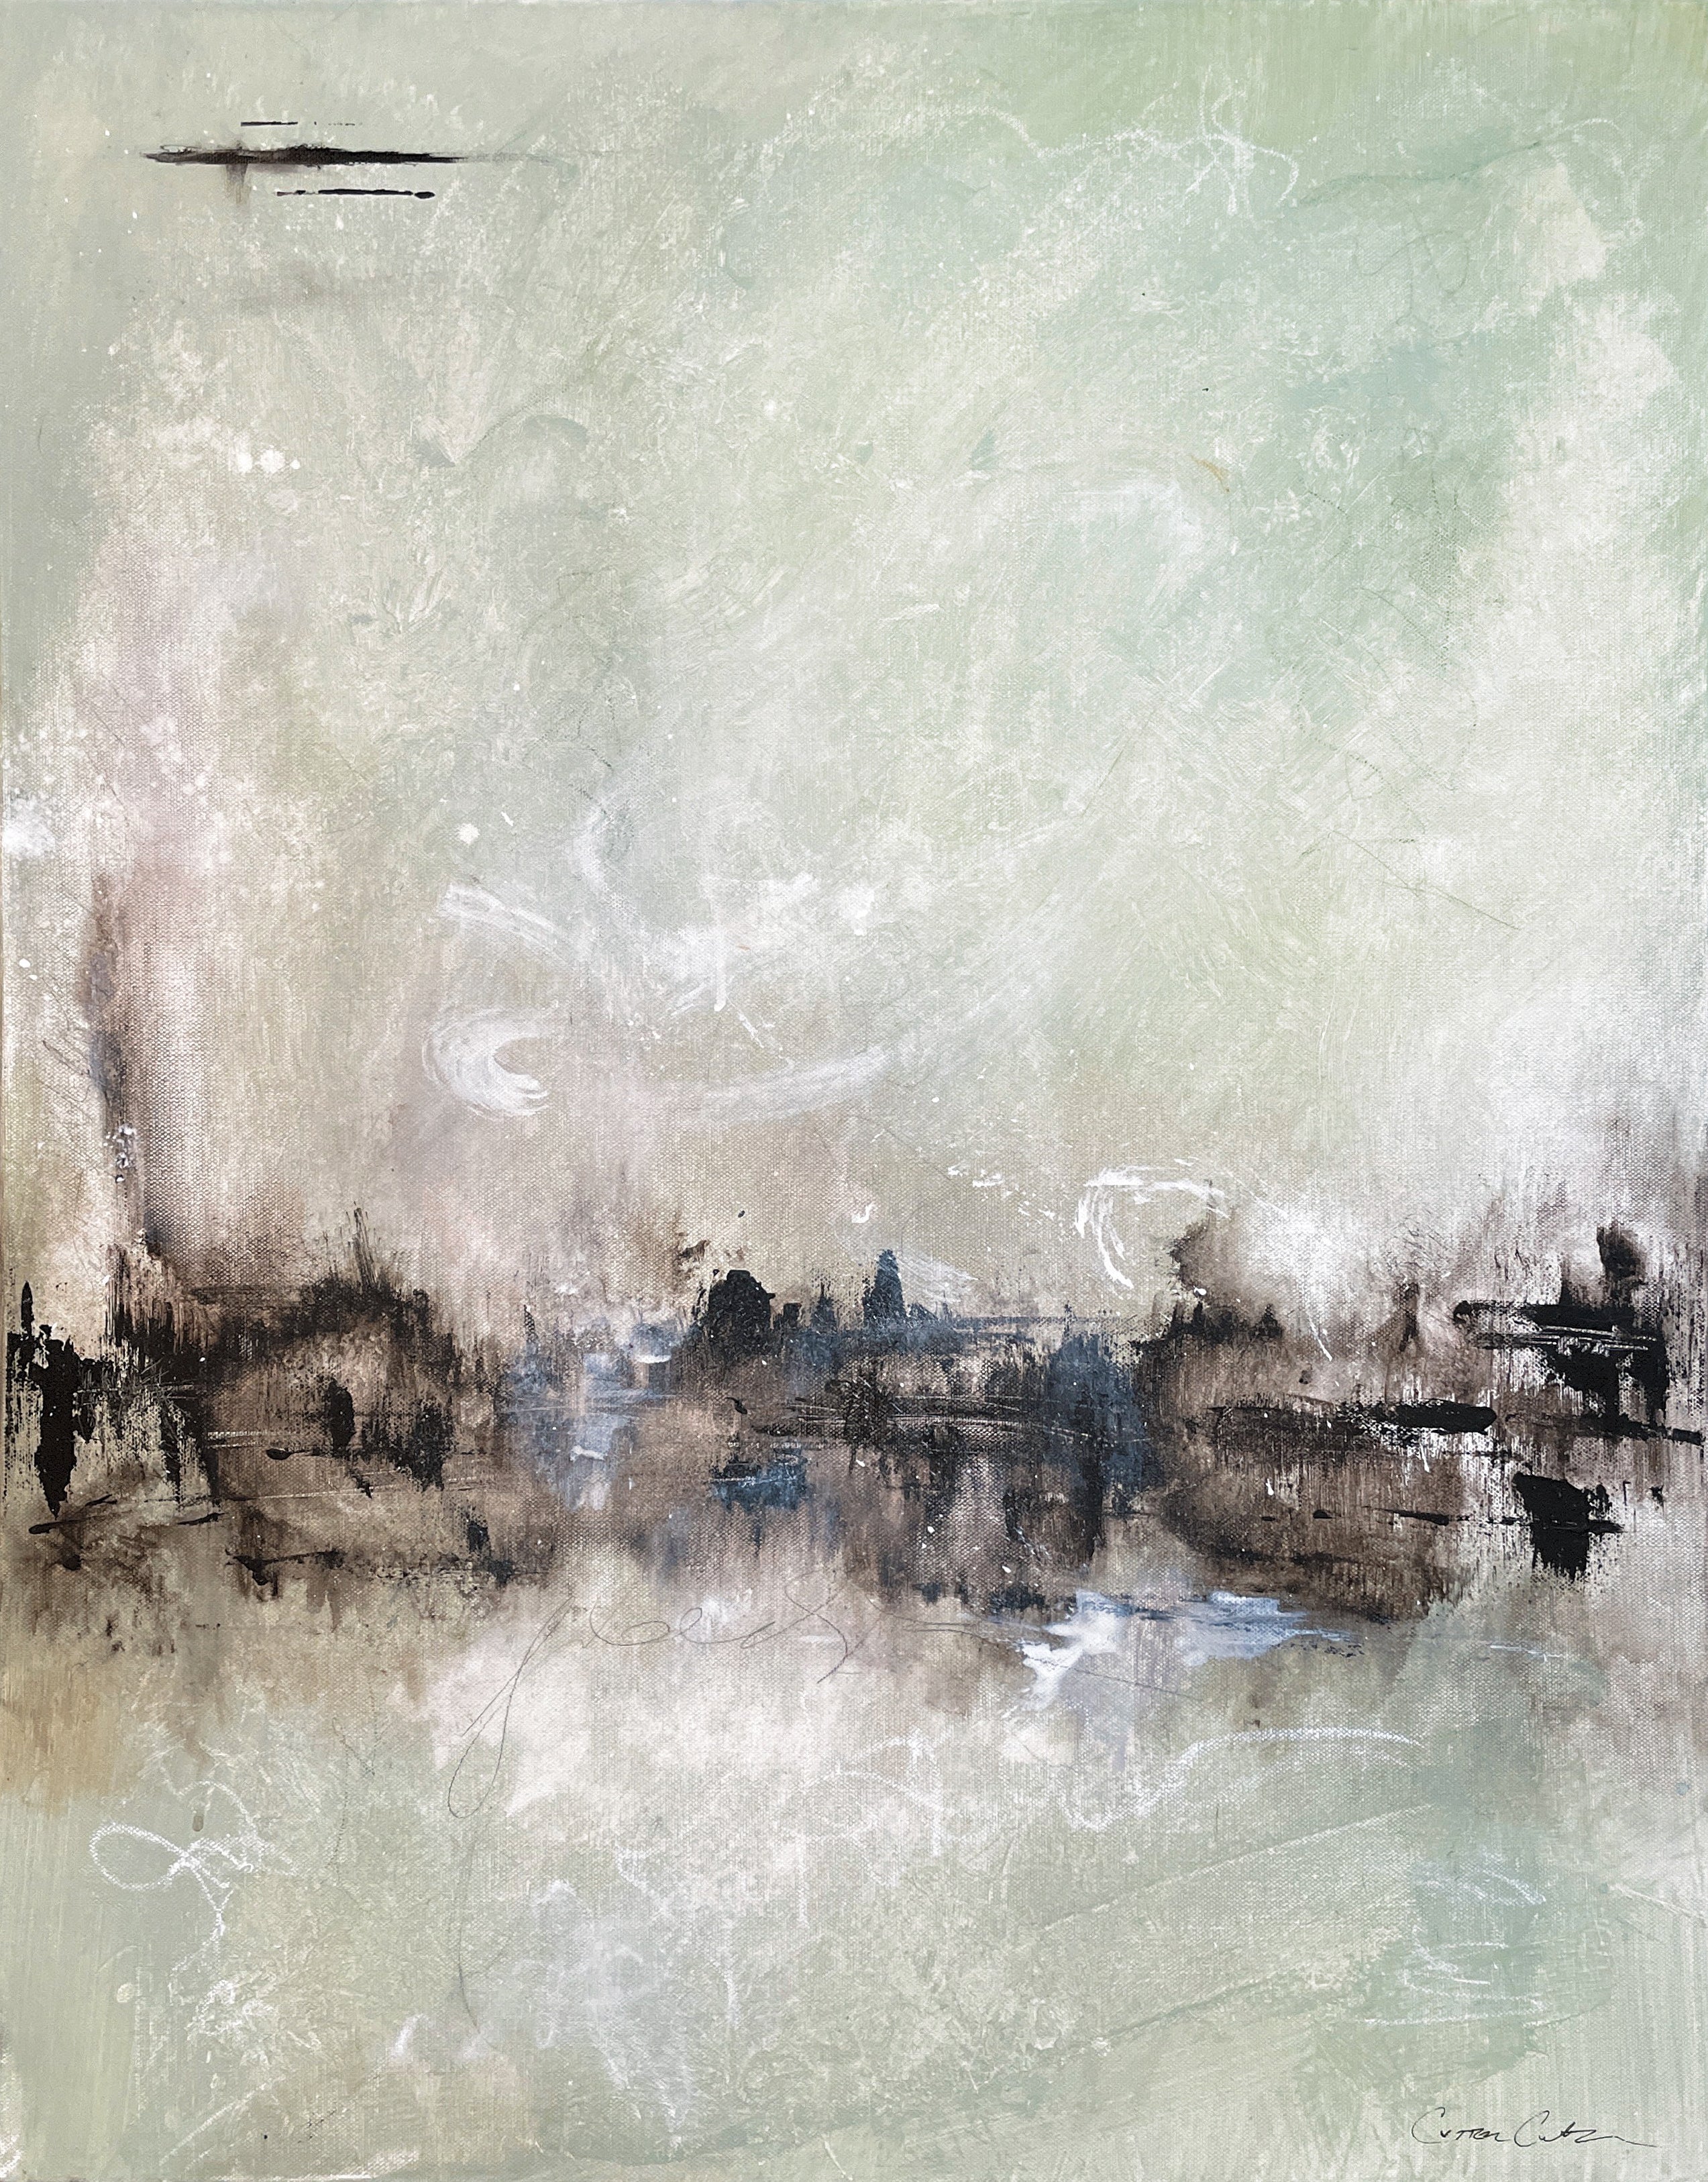 Lost City of Baumann, Original Abstract Mixed Media Painting